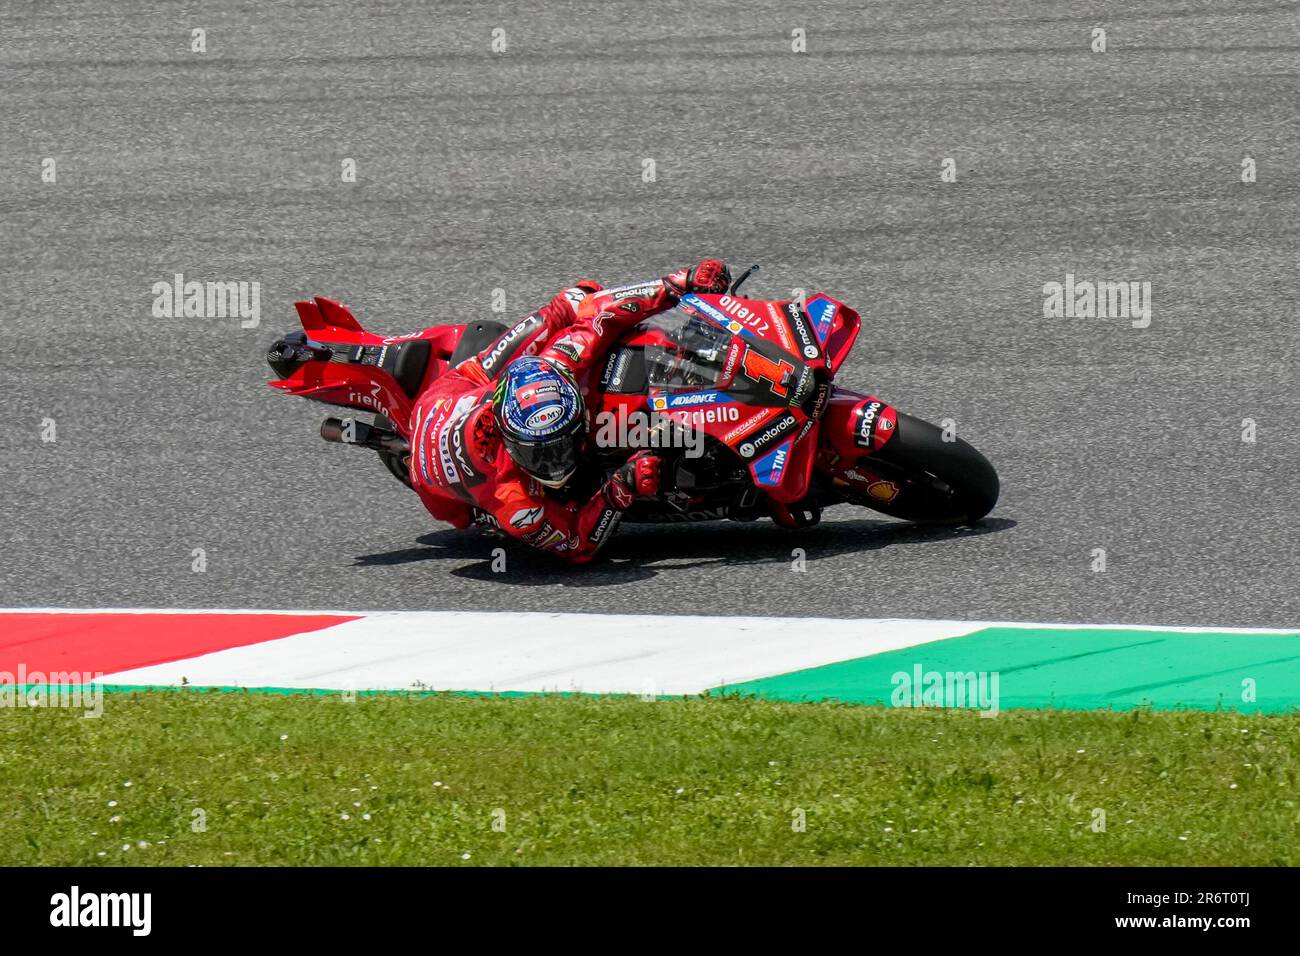 Italian rider Francesco Bagnaia of the Ducati Lenovo Team steers his motorcycle during the MotoGP race of the Grand Prix of Italy at the Mugello circuit in Scarperia, Italy, Sunday, June 11,